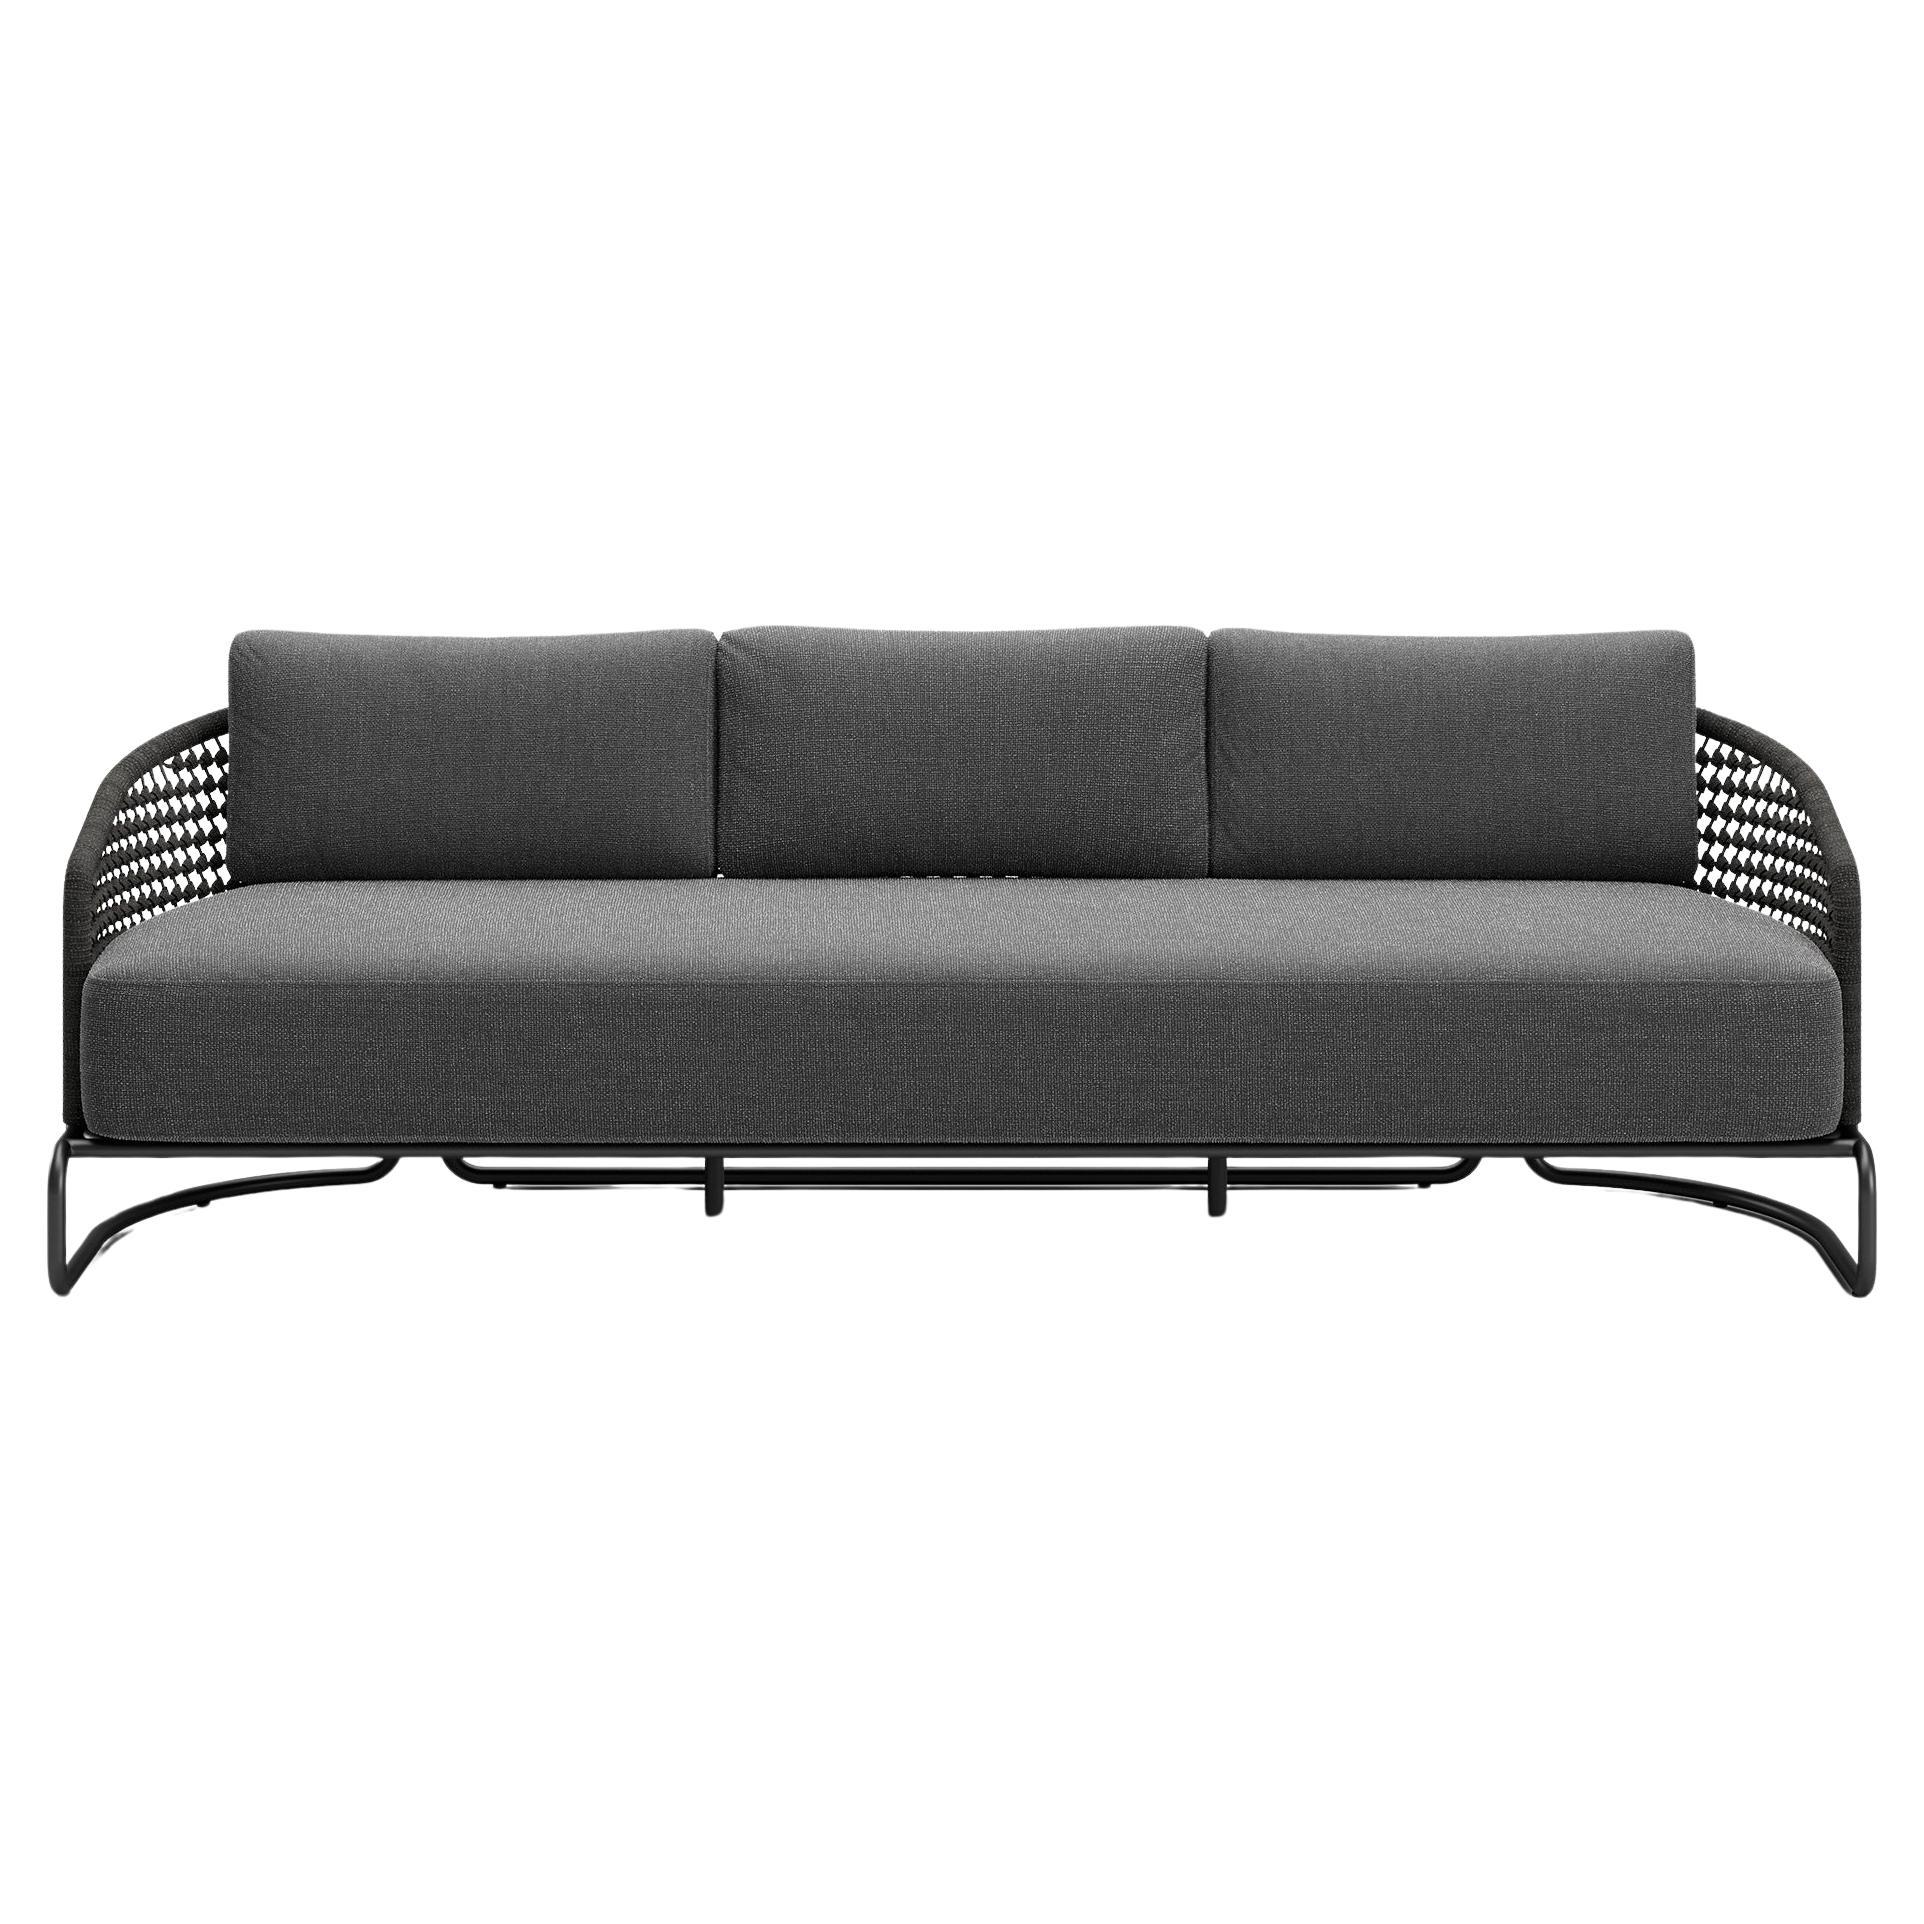 Pigalle Outdoor 3 Seater Sofa by Snoc For Sale